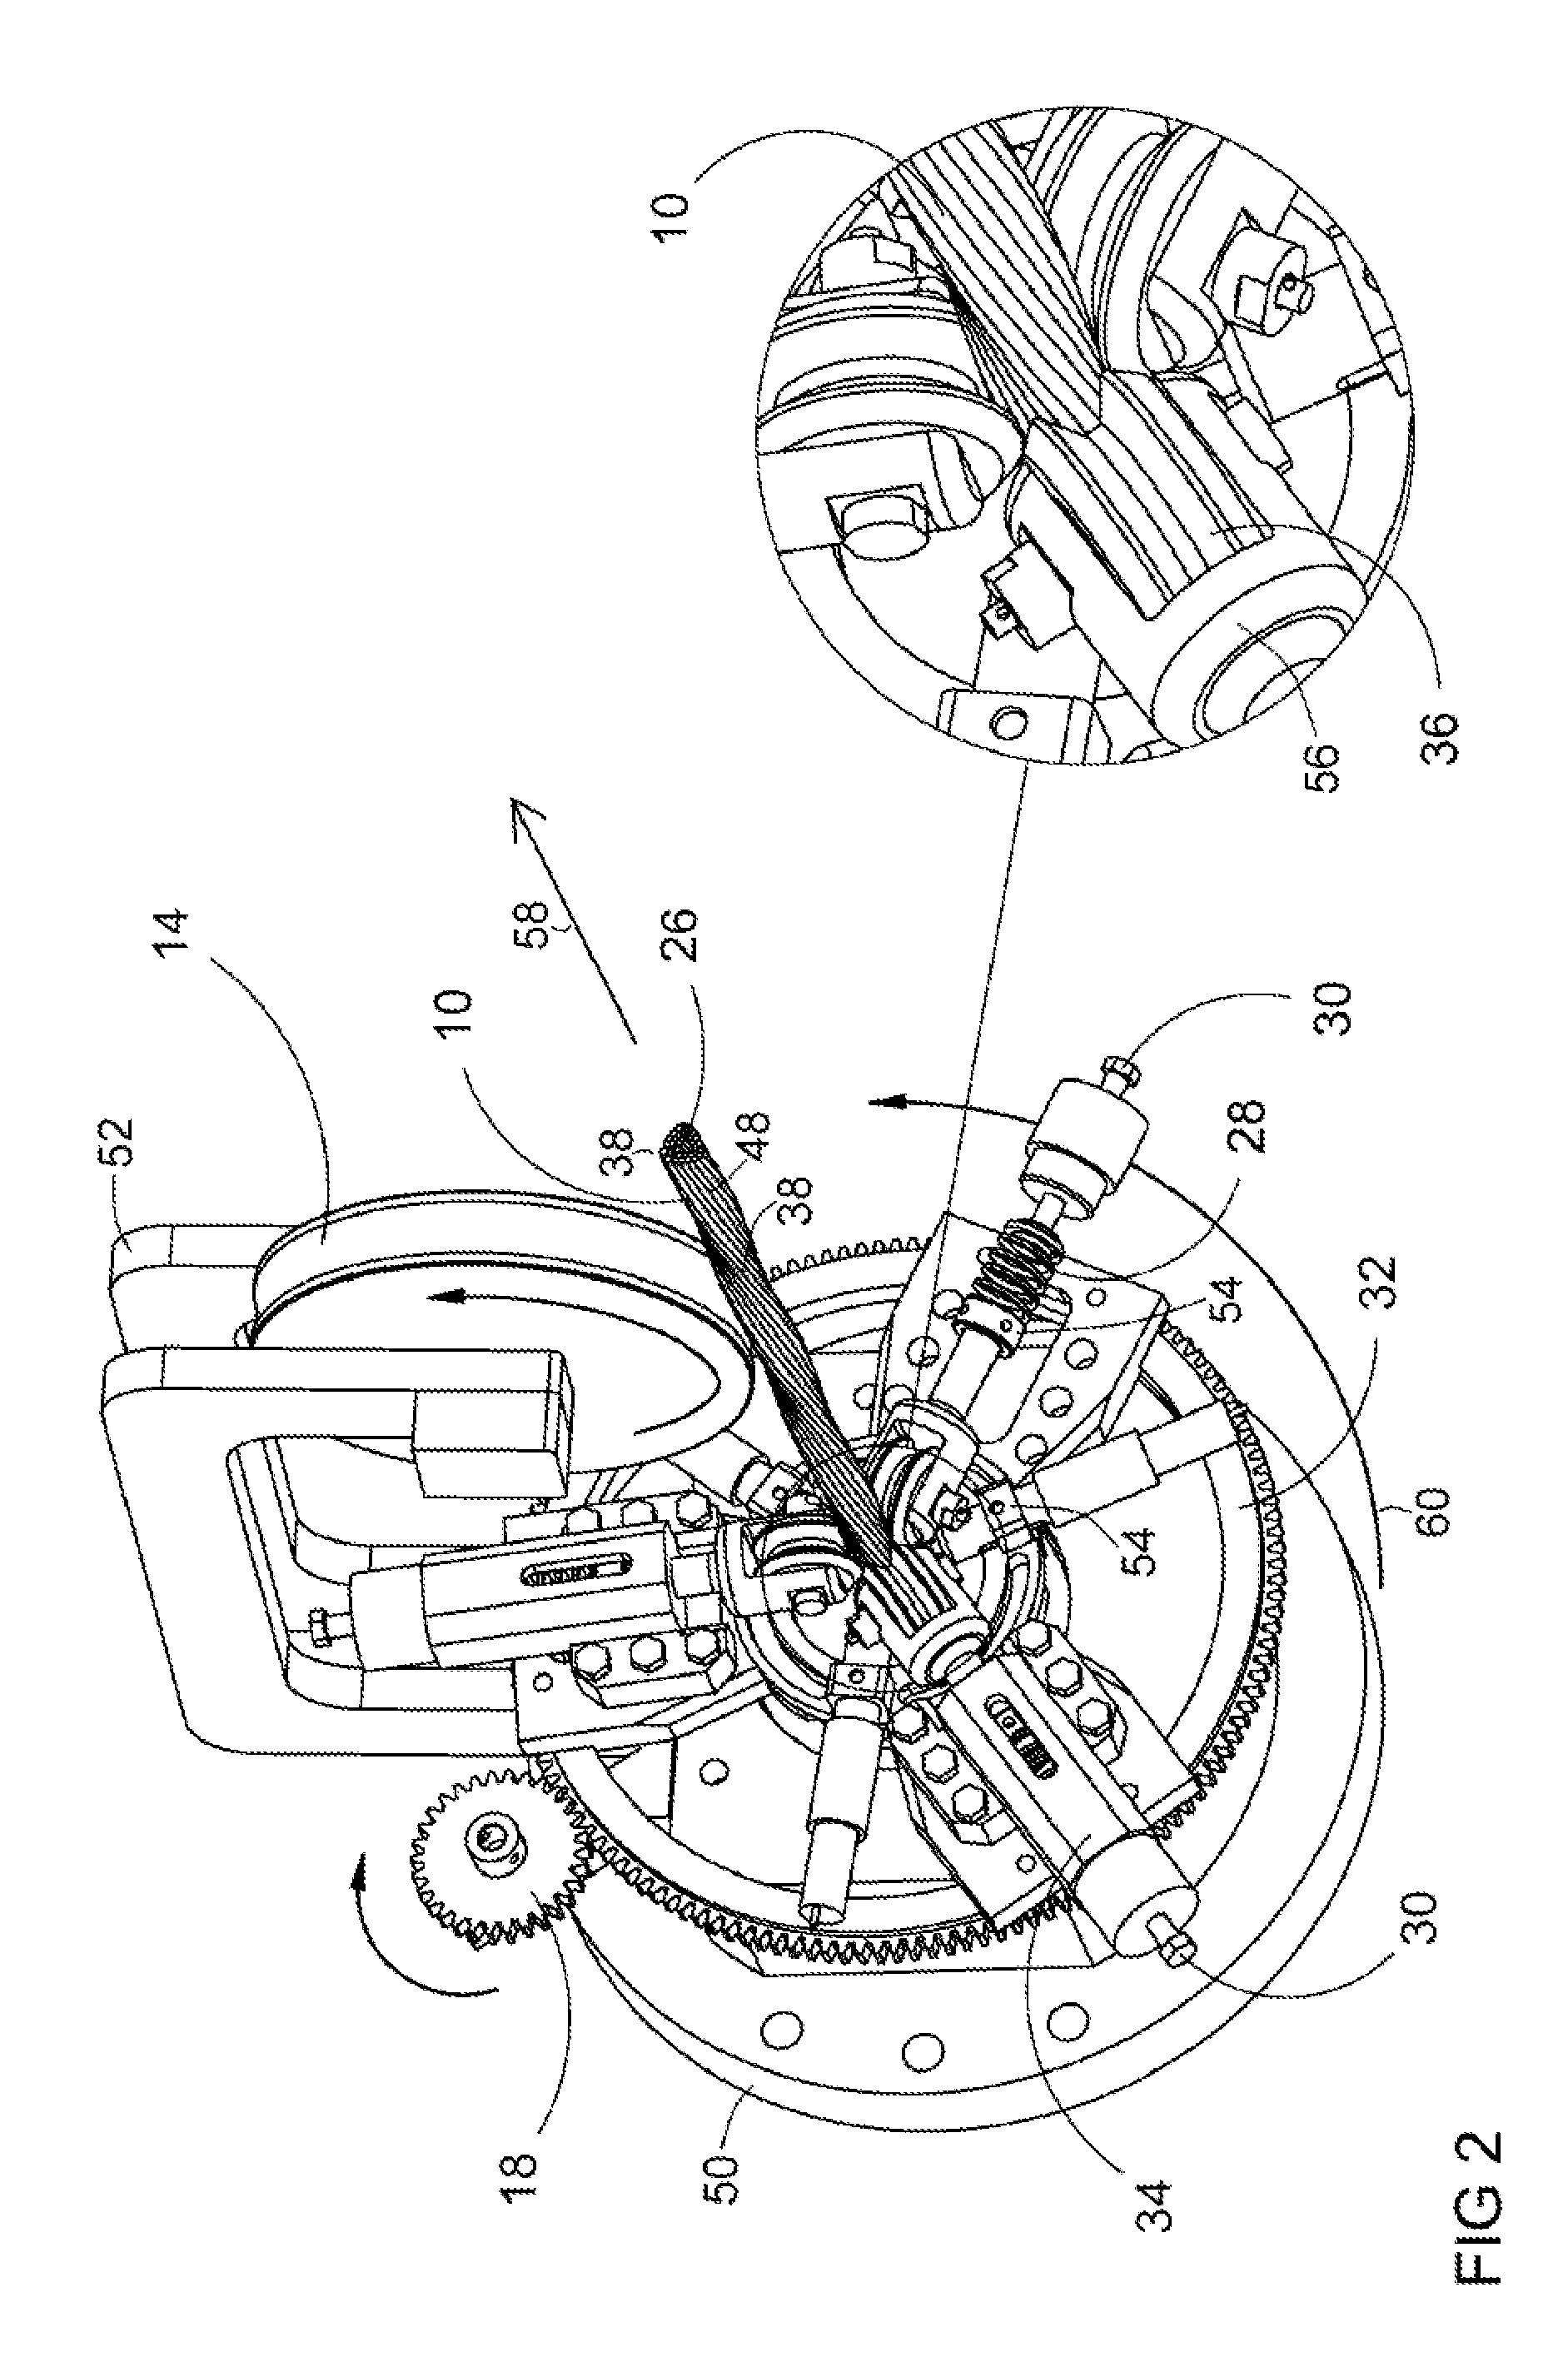 System and method for measuring geometry of non-circular twisted strand during stranding process